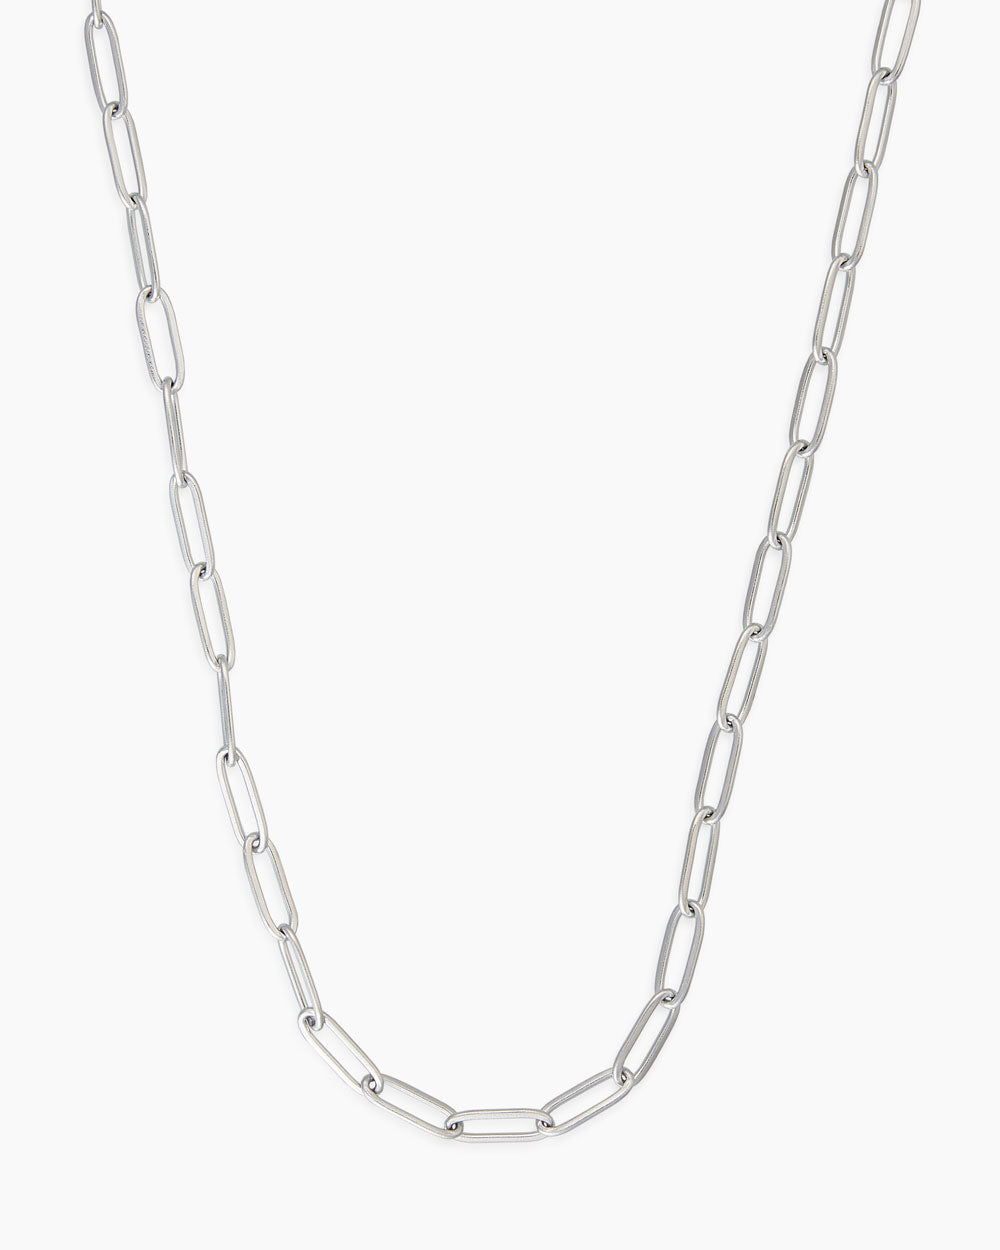 Cameron Silver Necklace - Penny Pairs